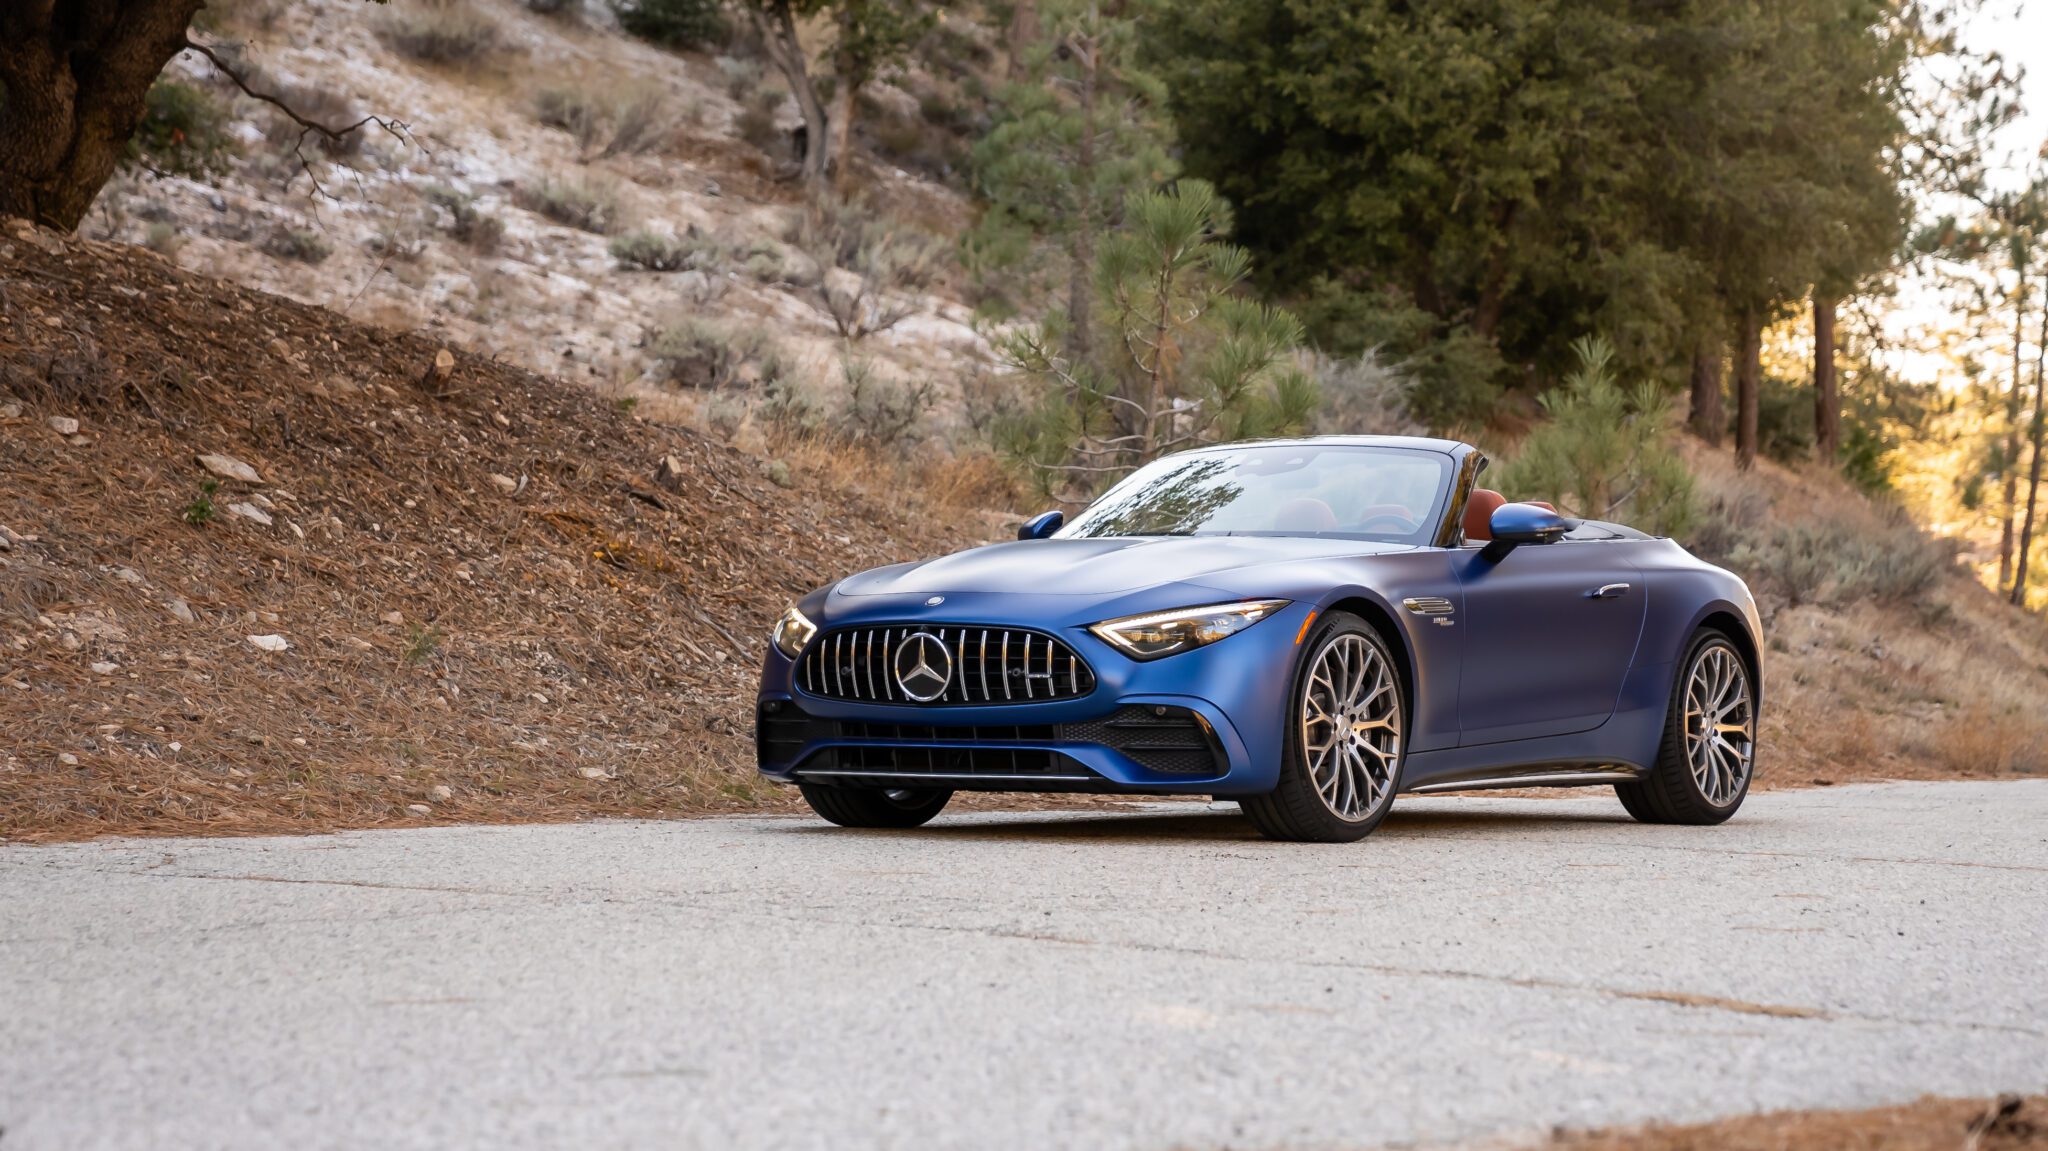 An image of a blue Mercedes-AMG SL 43 parked outdoors.